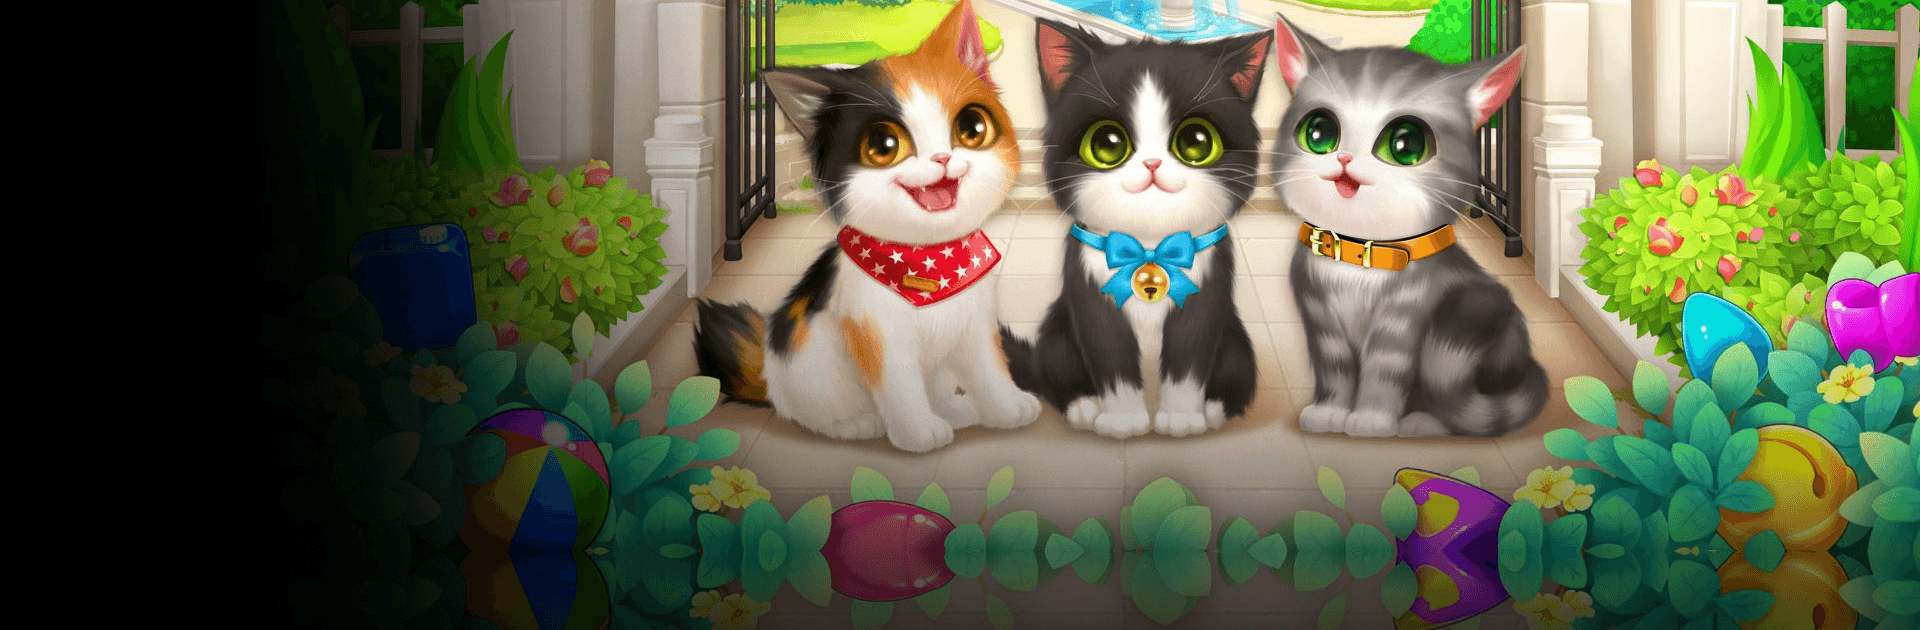 CAT ROOM BLAST - Play Online for Free!